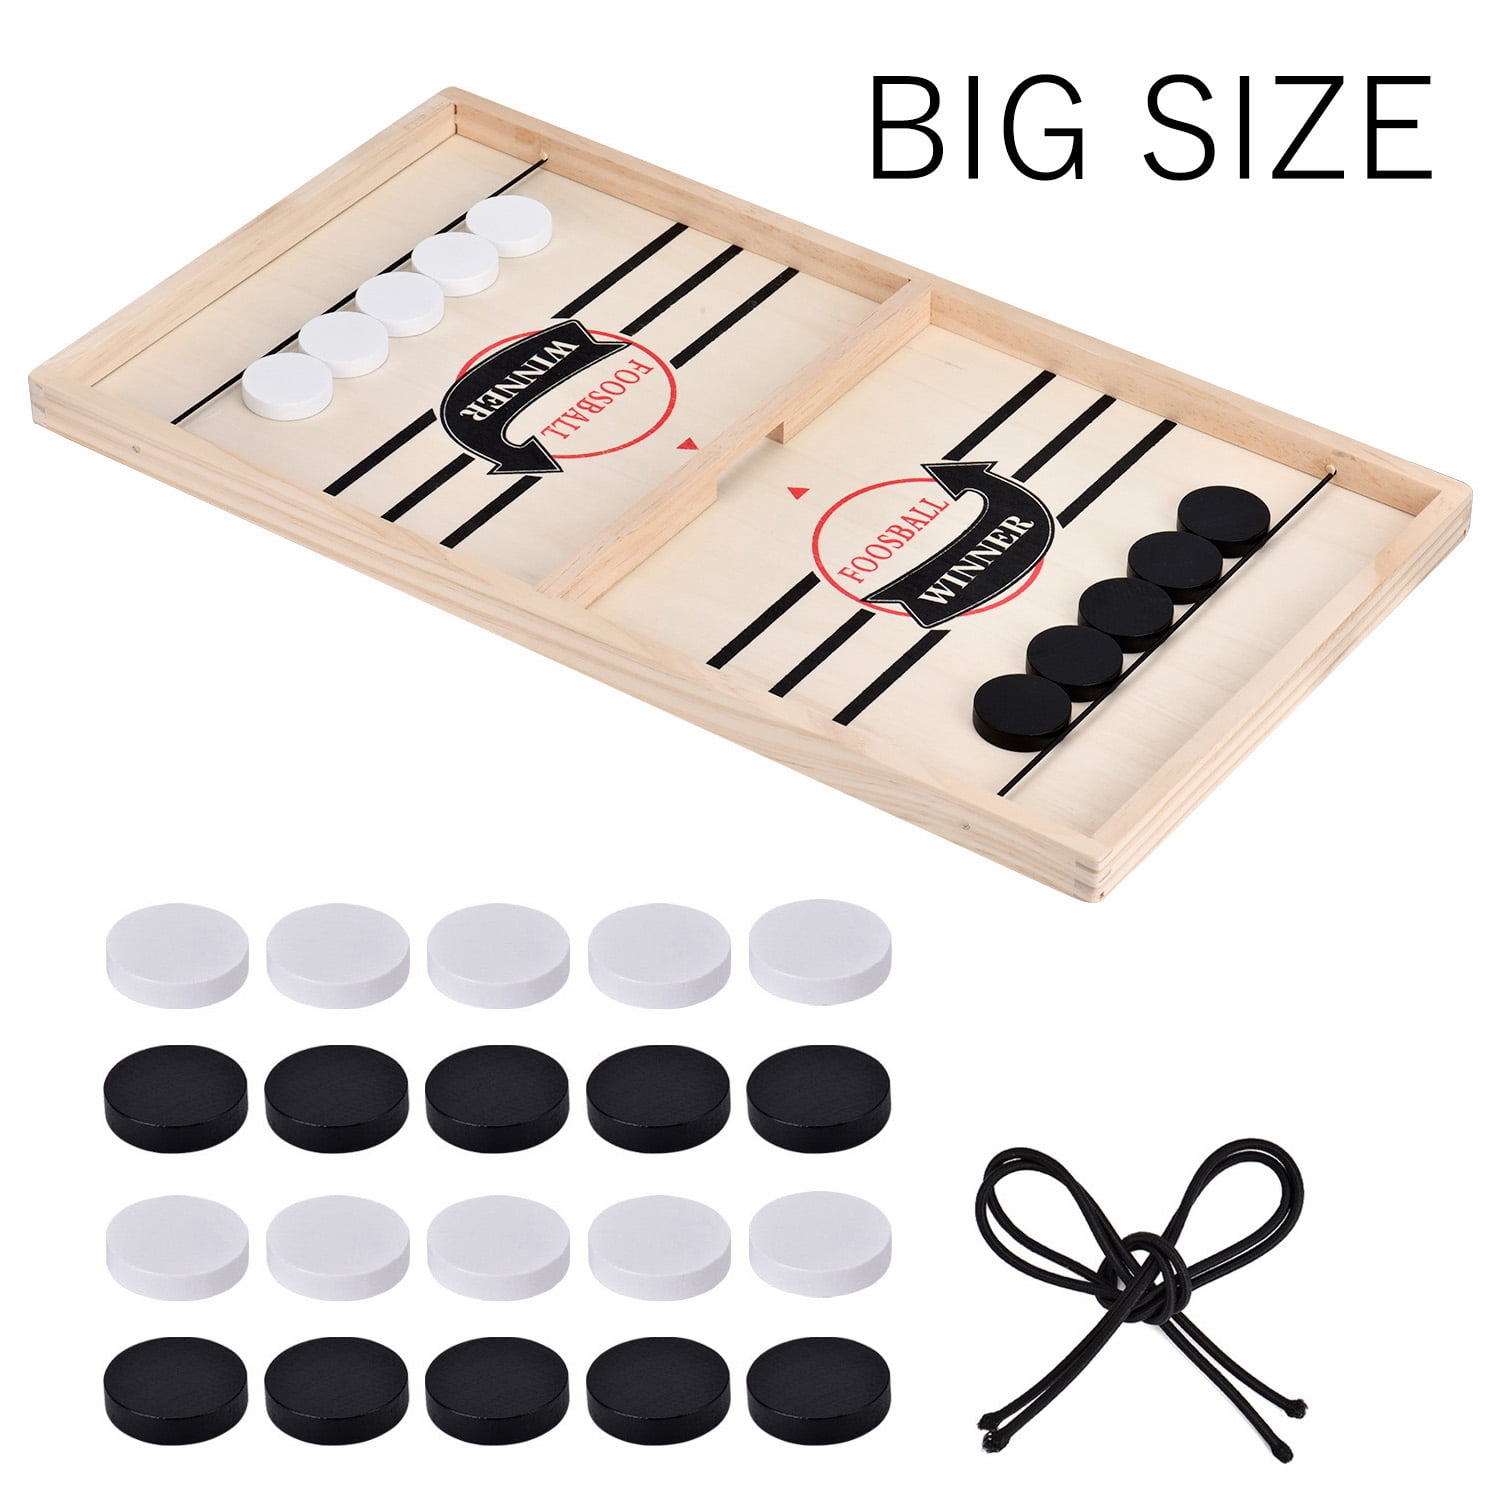 Casi Sling Puck Game Wooden Board Table hockey game d Toys fiesta children d j9m9 